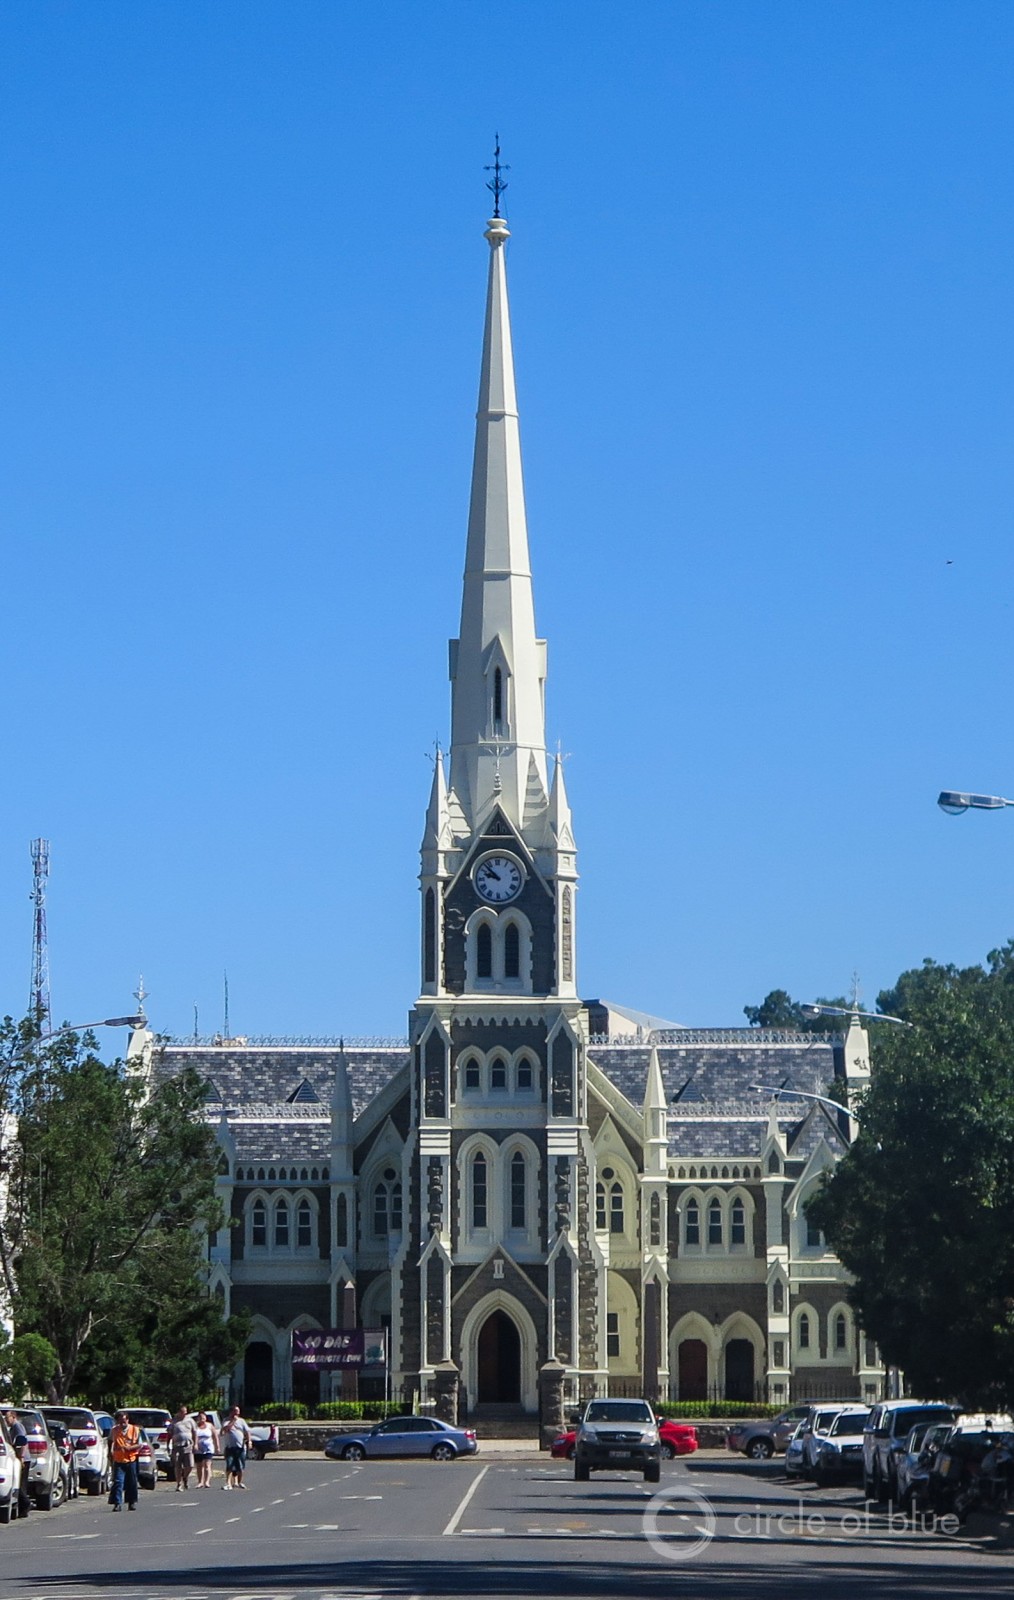 The Dutch Reform church at the center of Graaff-Reinet, a desert Karoo town that is South Africa’s fourth oldest.